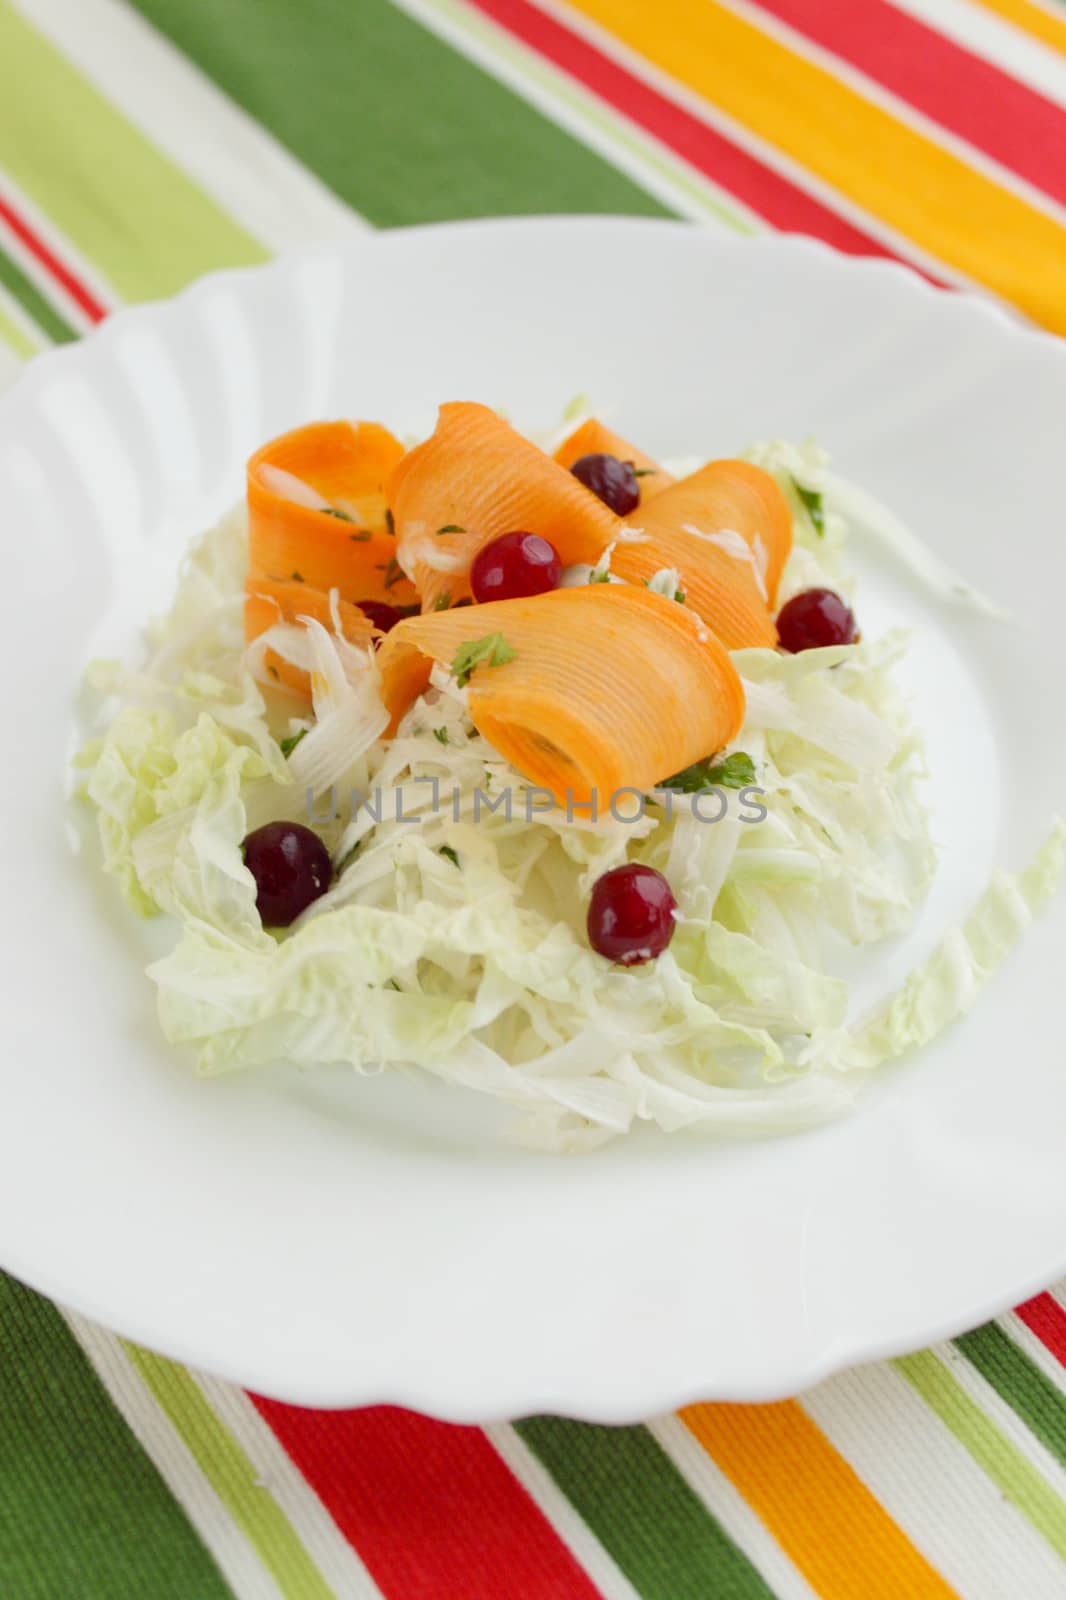 Salad from the cabbage by Mallivan